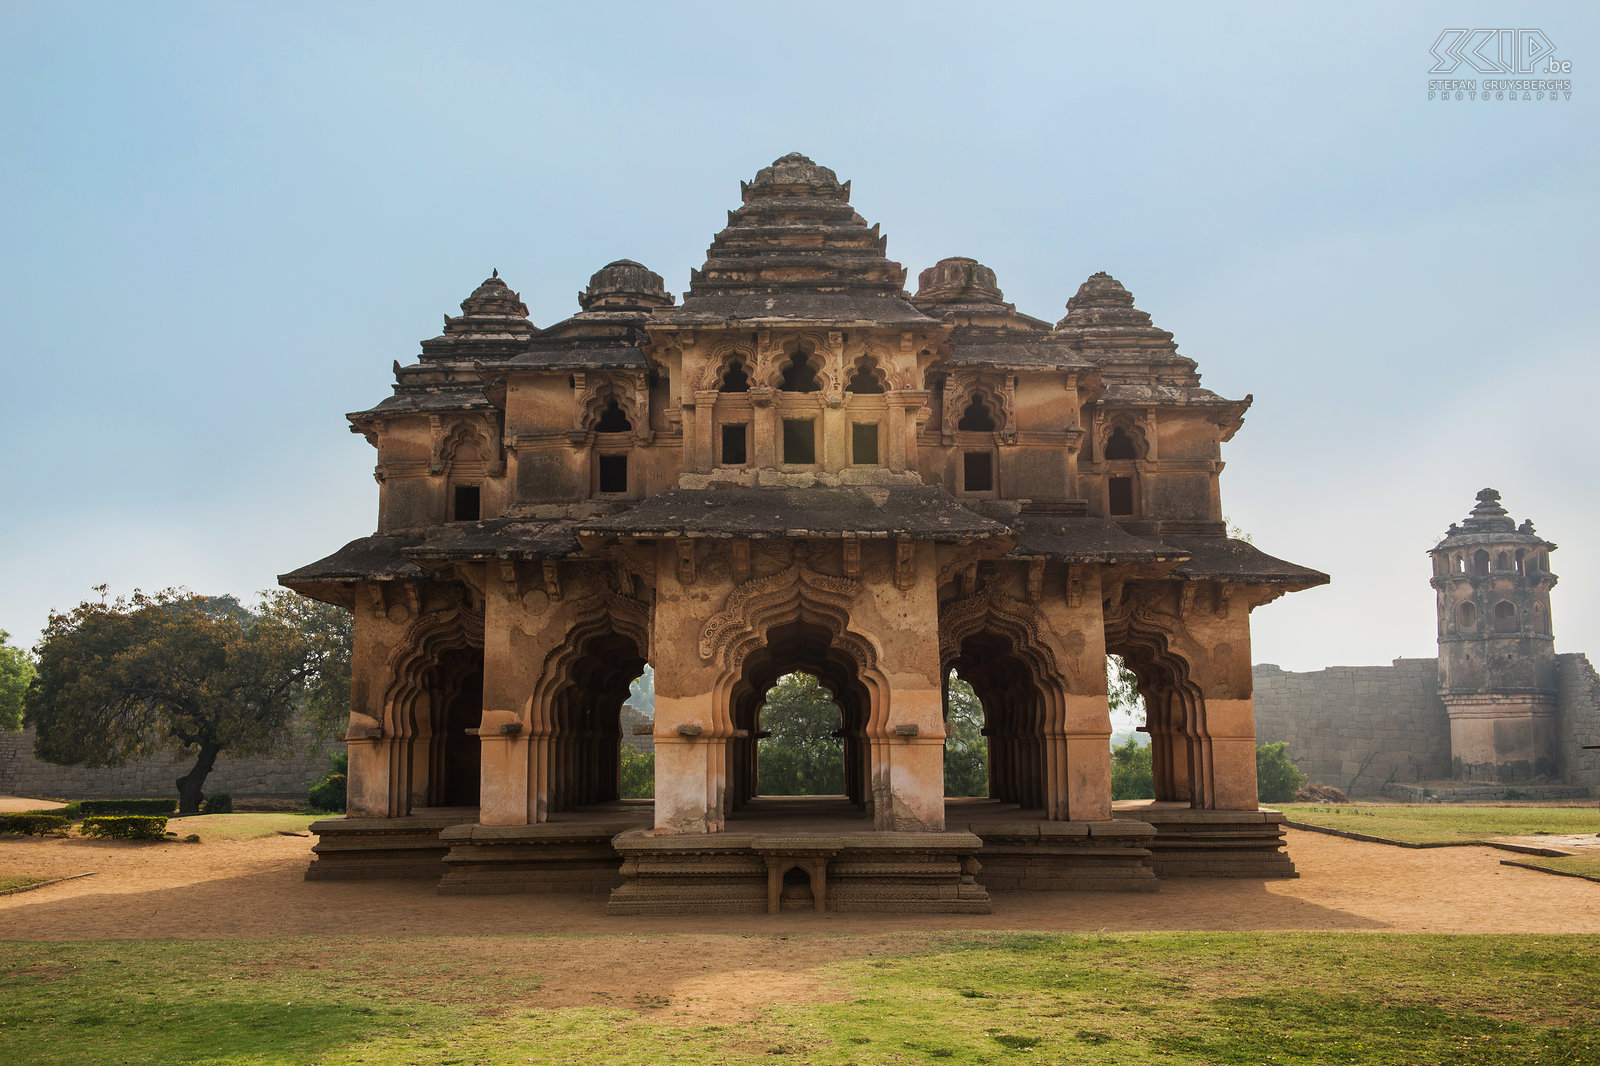 Hampi - Zana enclosure - Lotus Mahal The Zenana enclosure was a secluded area reserved for the royal women of the Vijayanagara Empire. The major attraction is the Lotus Mahal. This pavilion has been designed in the shape of a lotus bud. Stefan Cruysberghs